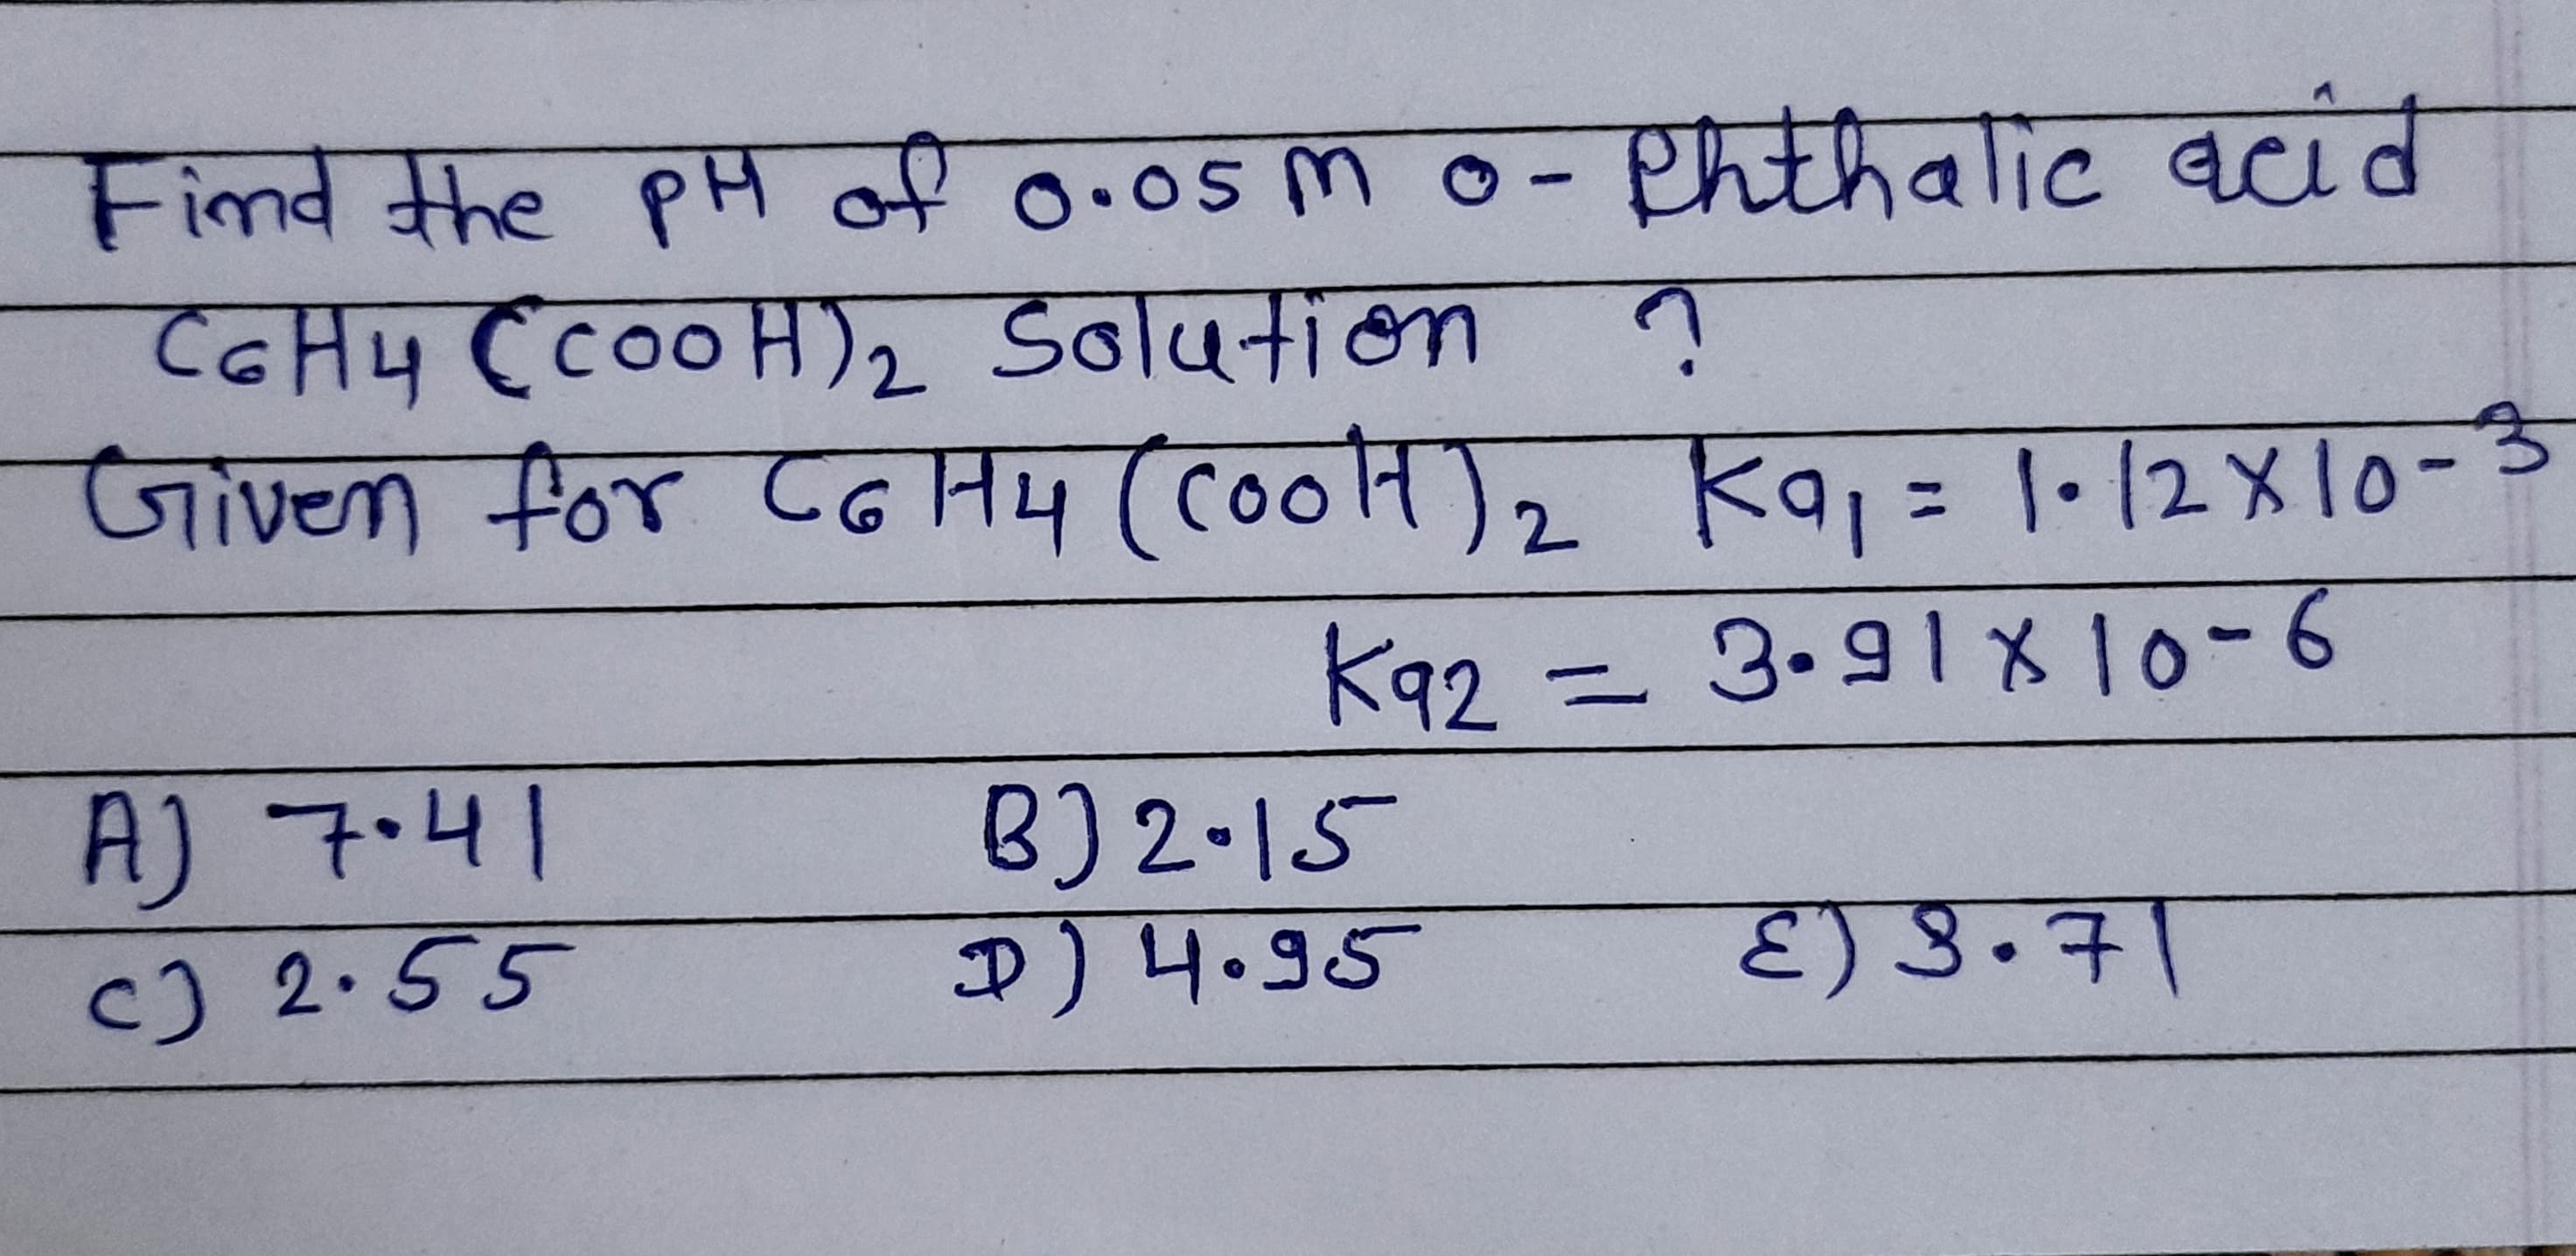 Find the PH of 0.05 m
o- Phthalic acid
एवाट
CGH4 CCOOH)2 Solution ?
Sol4नiमा
Given for CG H4 (coolH),
ka, = 1•[2 X 10-
%3D
K92 = 3.91810-6
A) 7.41
c) 2.55
B)2.15
) 4.95
